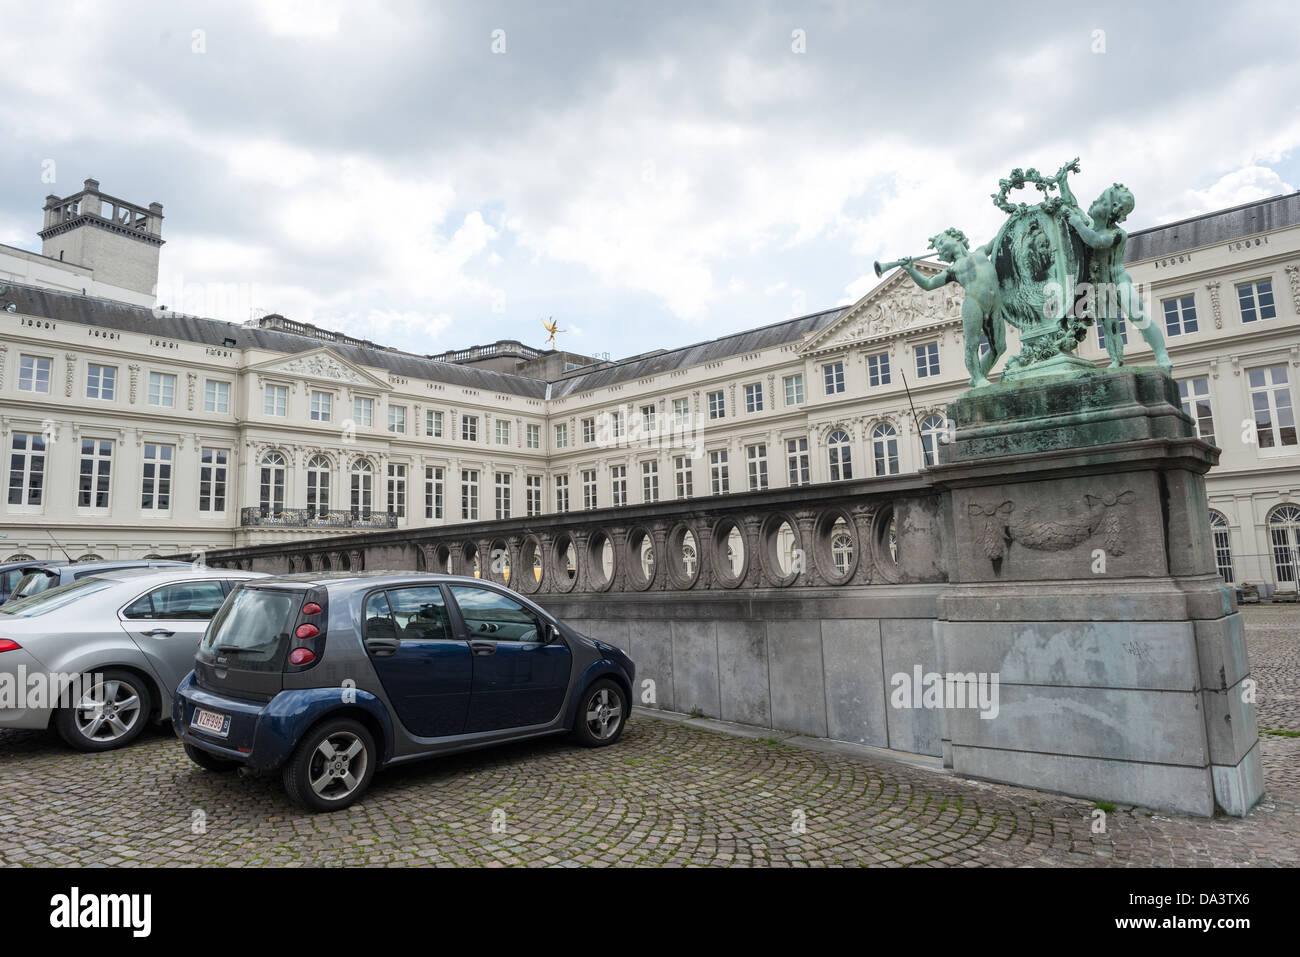 BRUSSELS, Belgium - The back of the Fine Arts Museum in Brussels, Belgium, with its cobblestone streets. Stock Photo